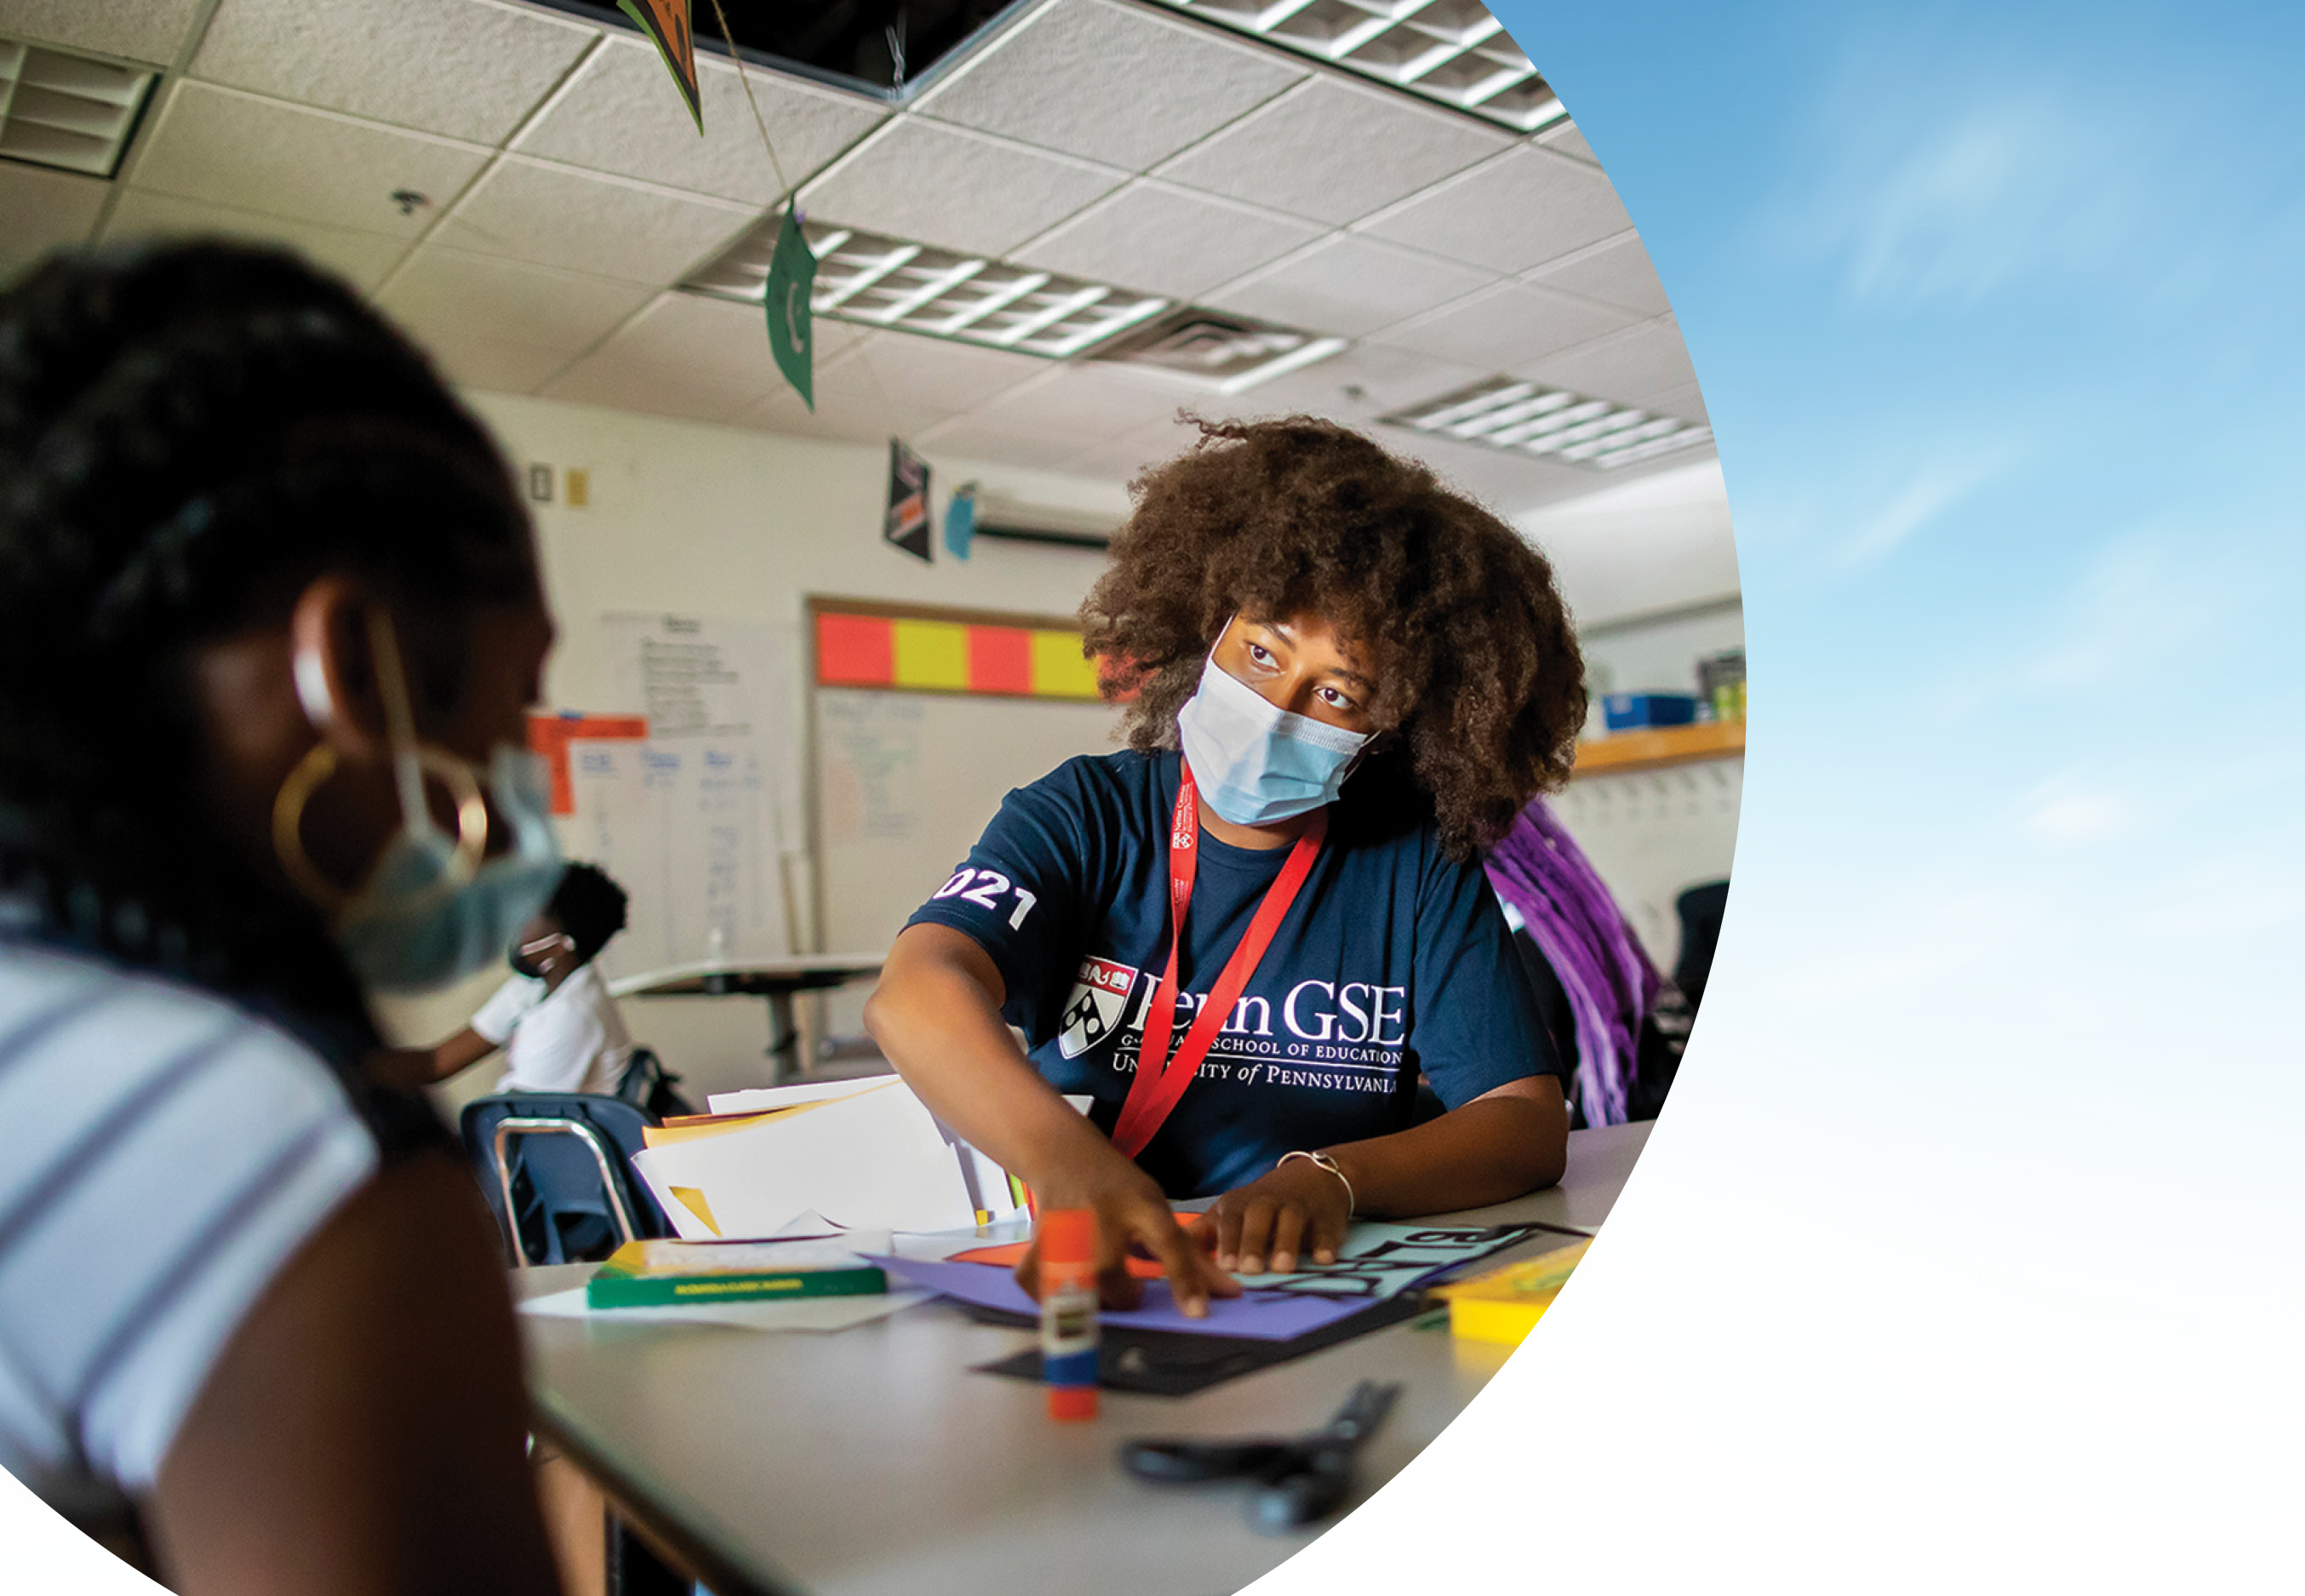 An instructor wearing a mask and a Penn GSE T-shirt is and engaged in conversation with a school student as they work on a project on a table. The photo is cropped with a semicircular edge against a blue-sky background.